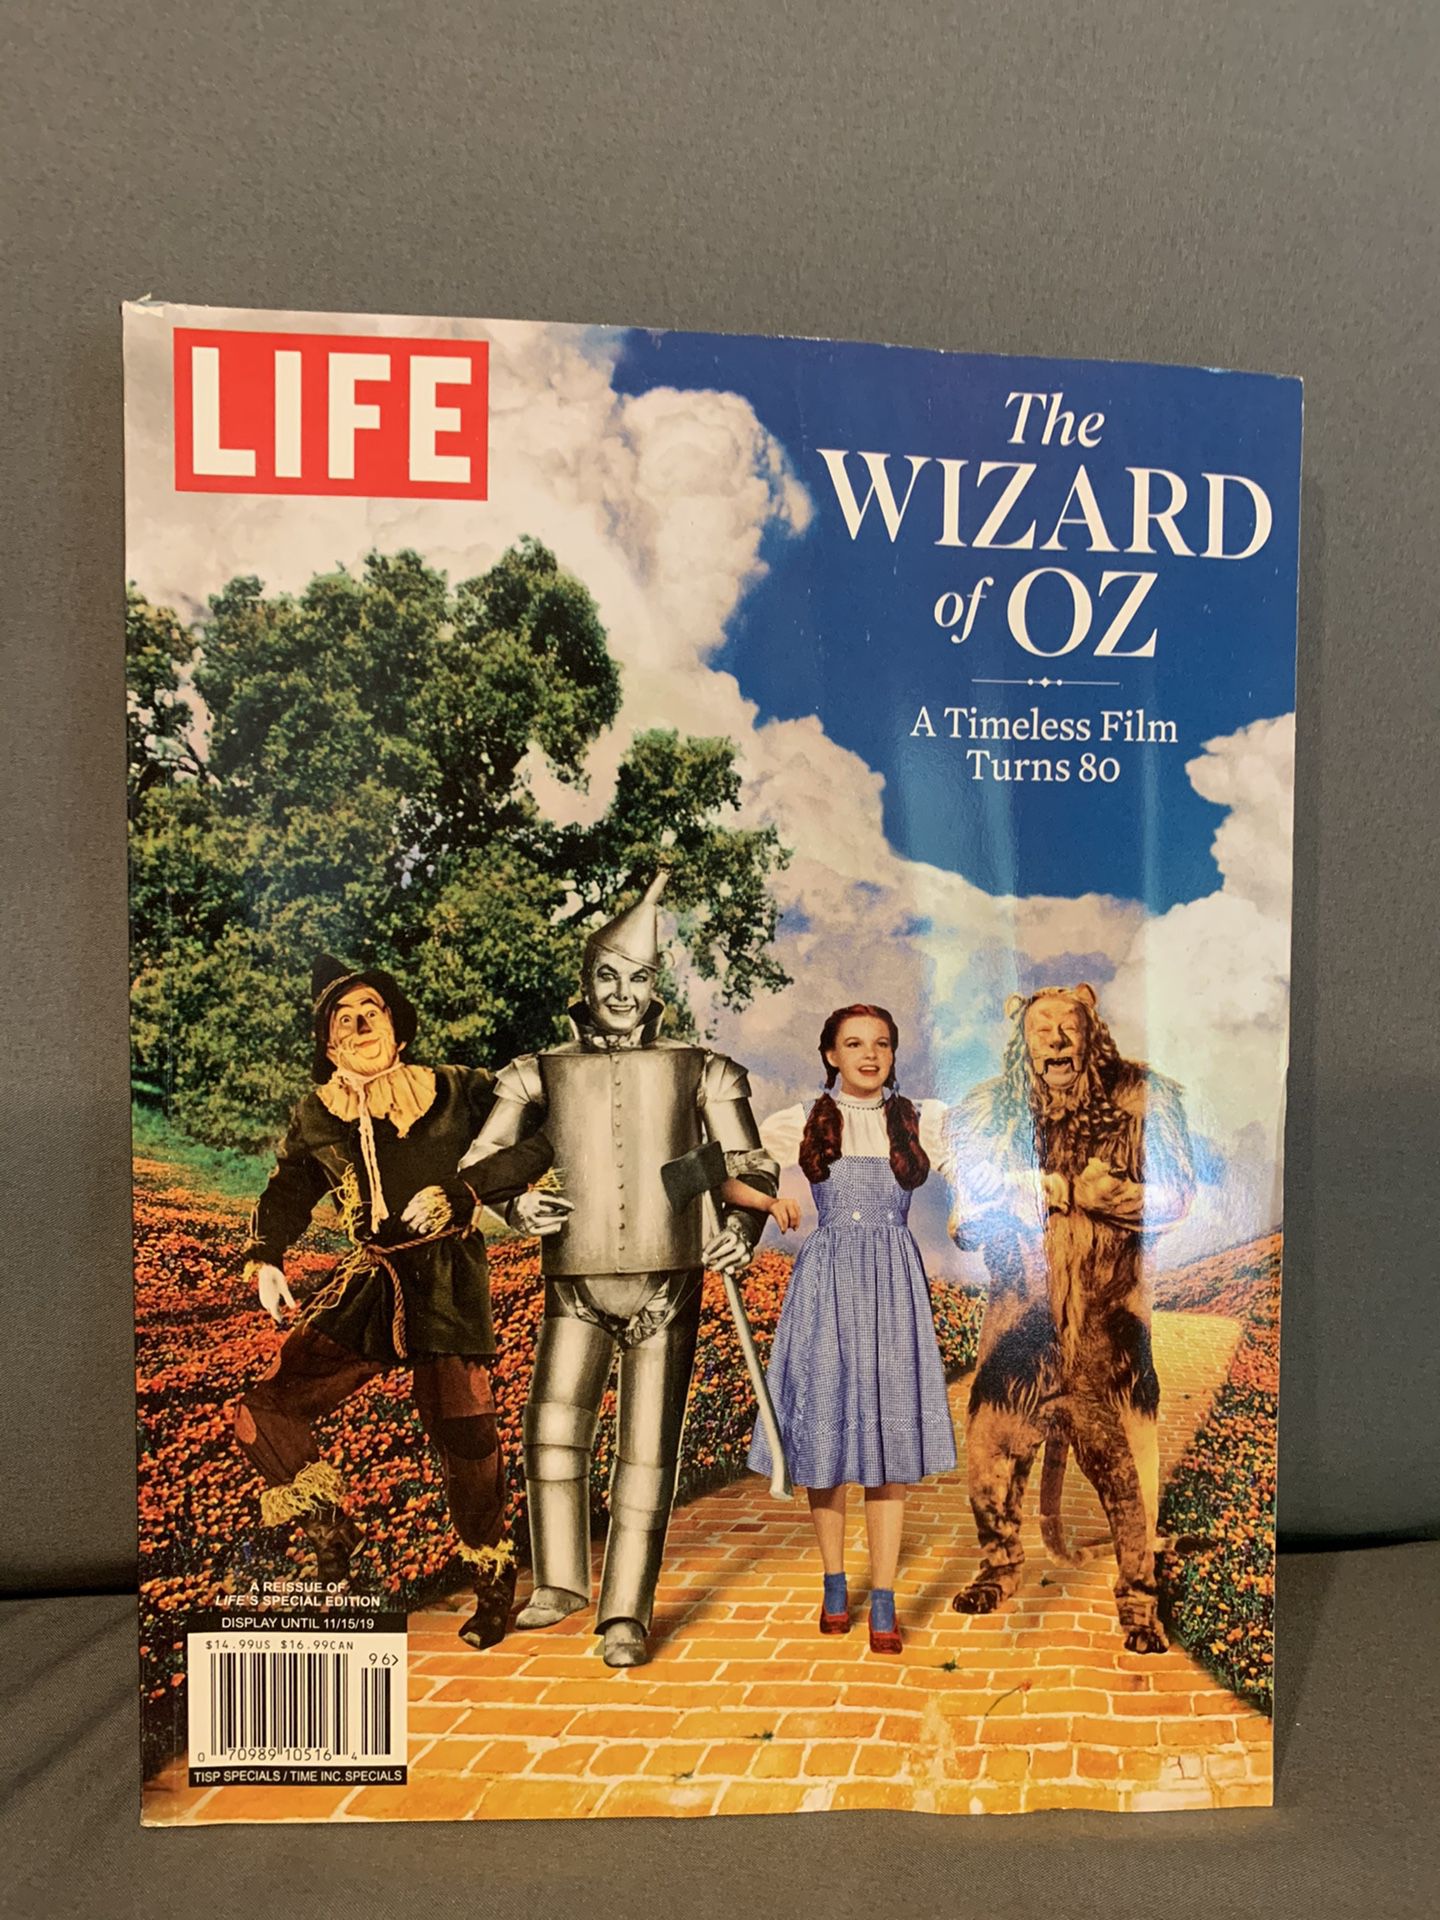 Wizard of Oz paperback book